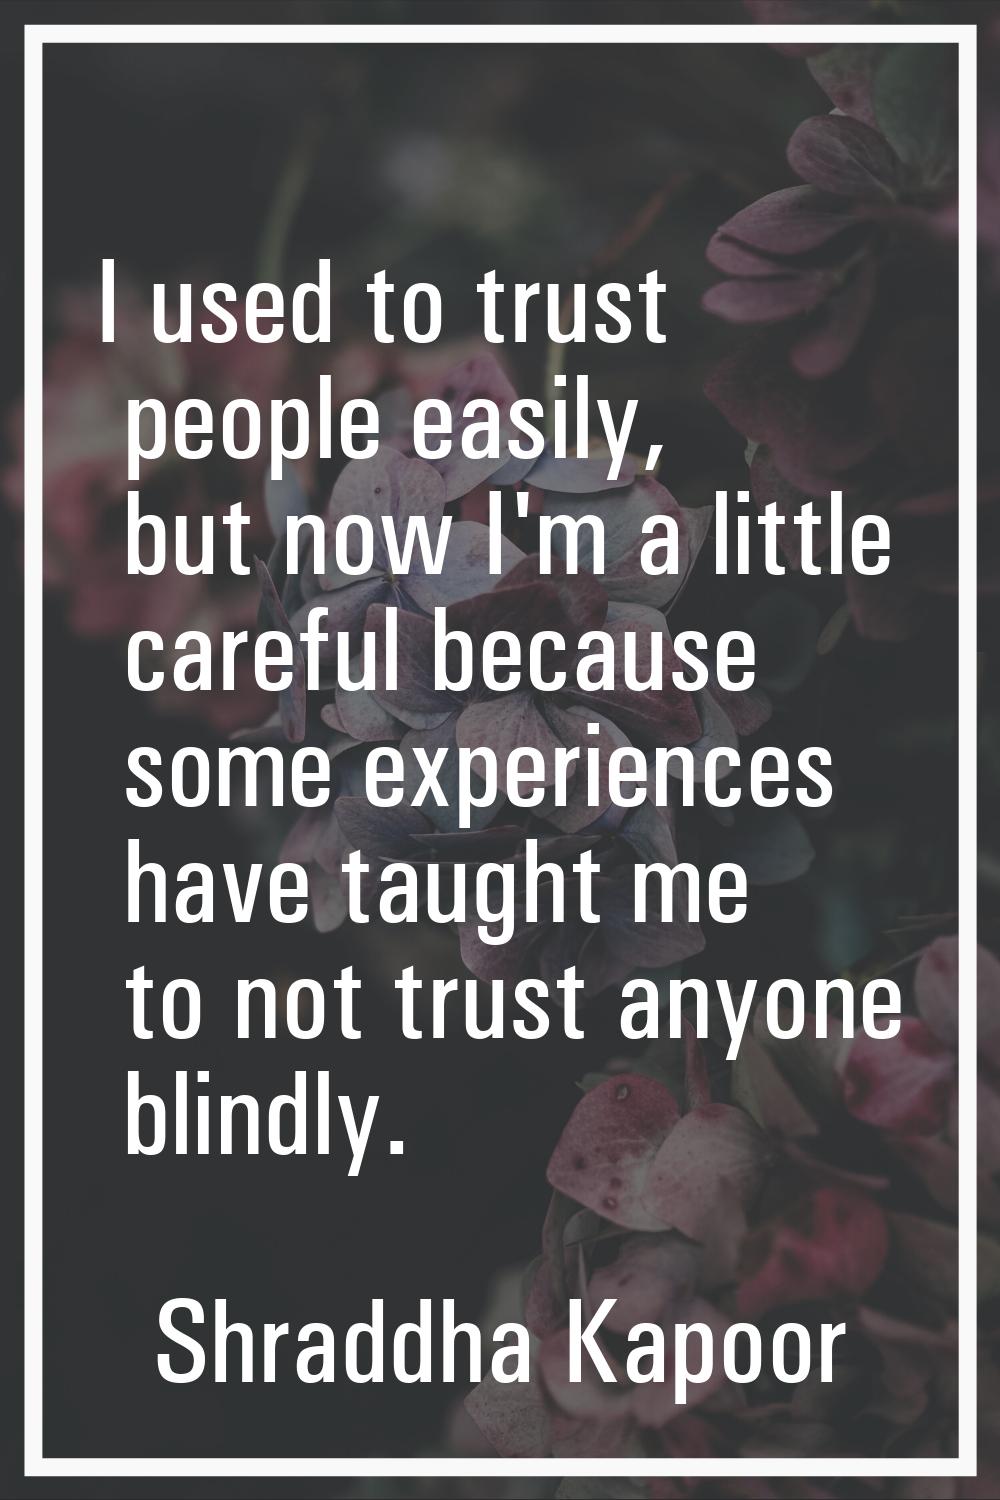 I used to trust people easily, but now I'm a little careful because some experiences have taught me